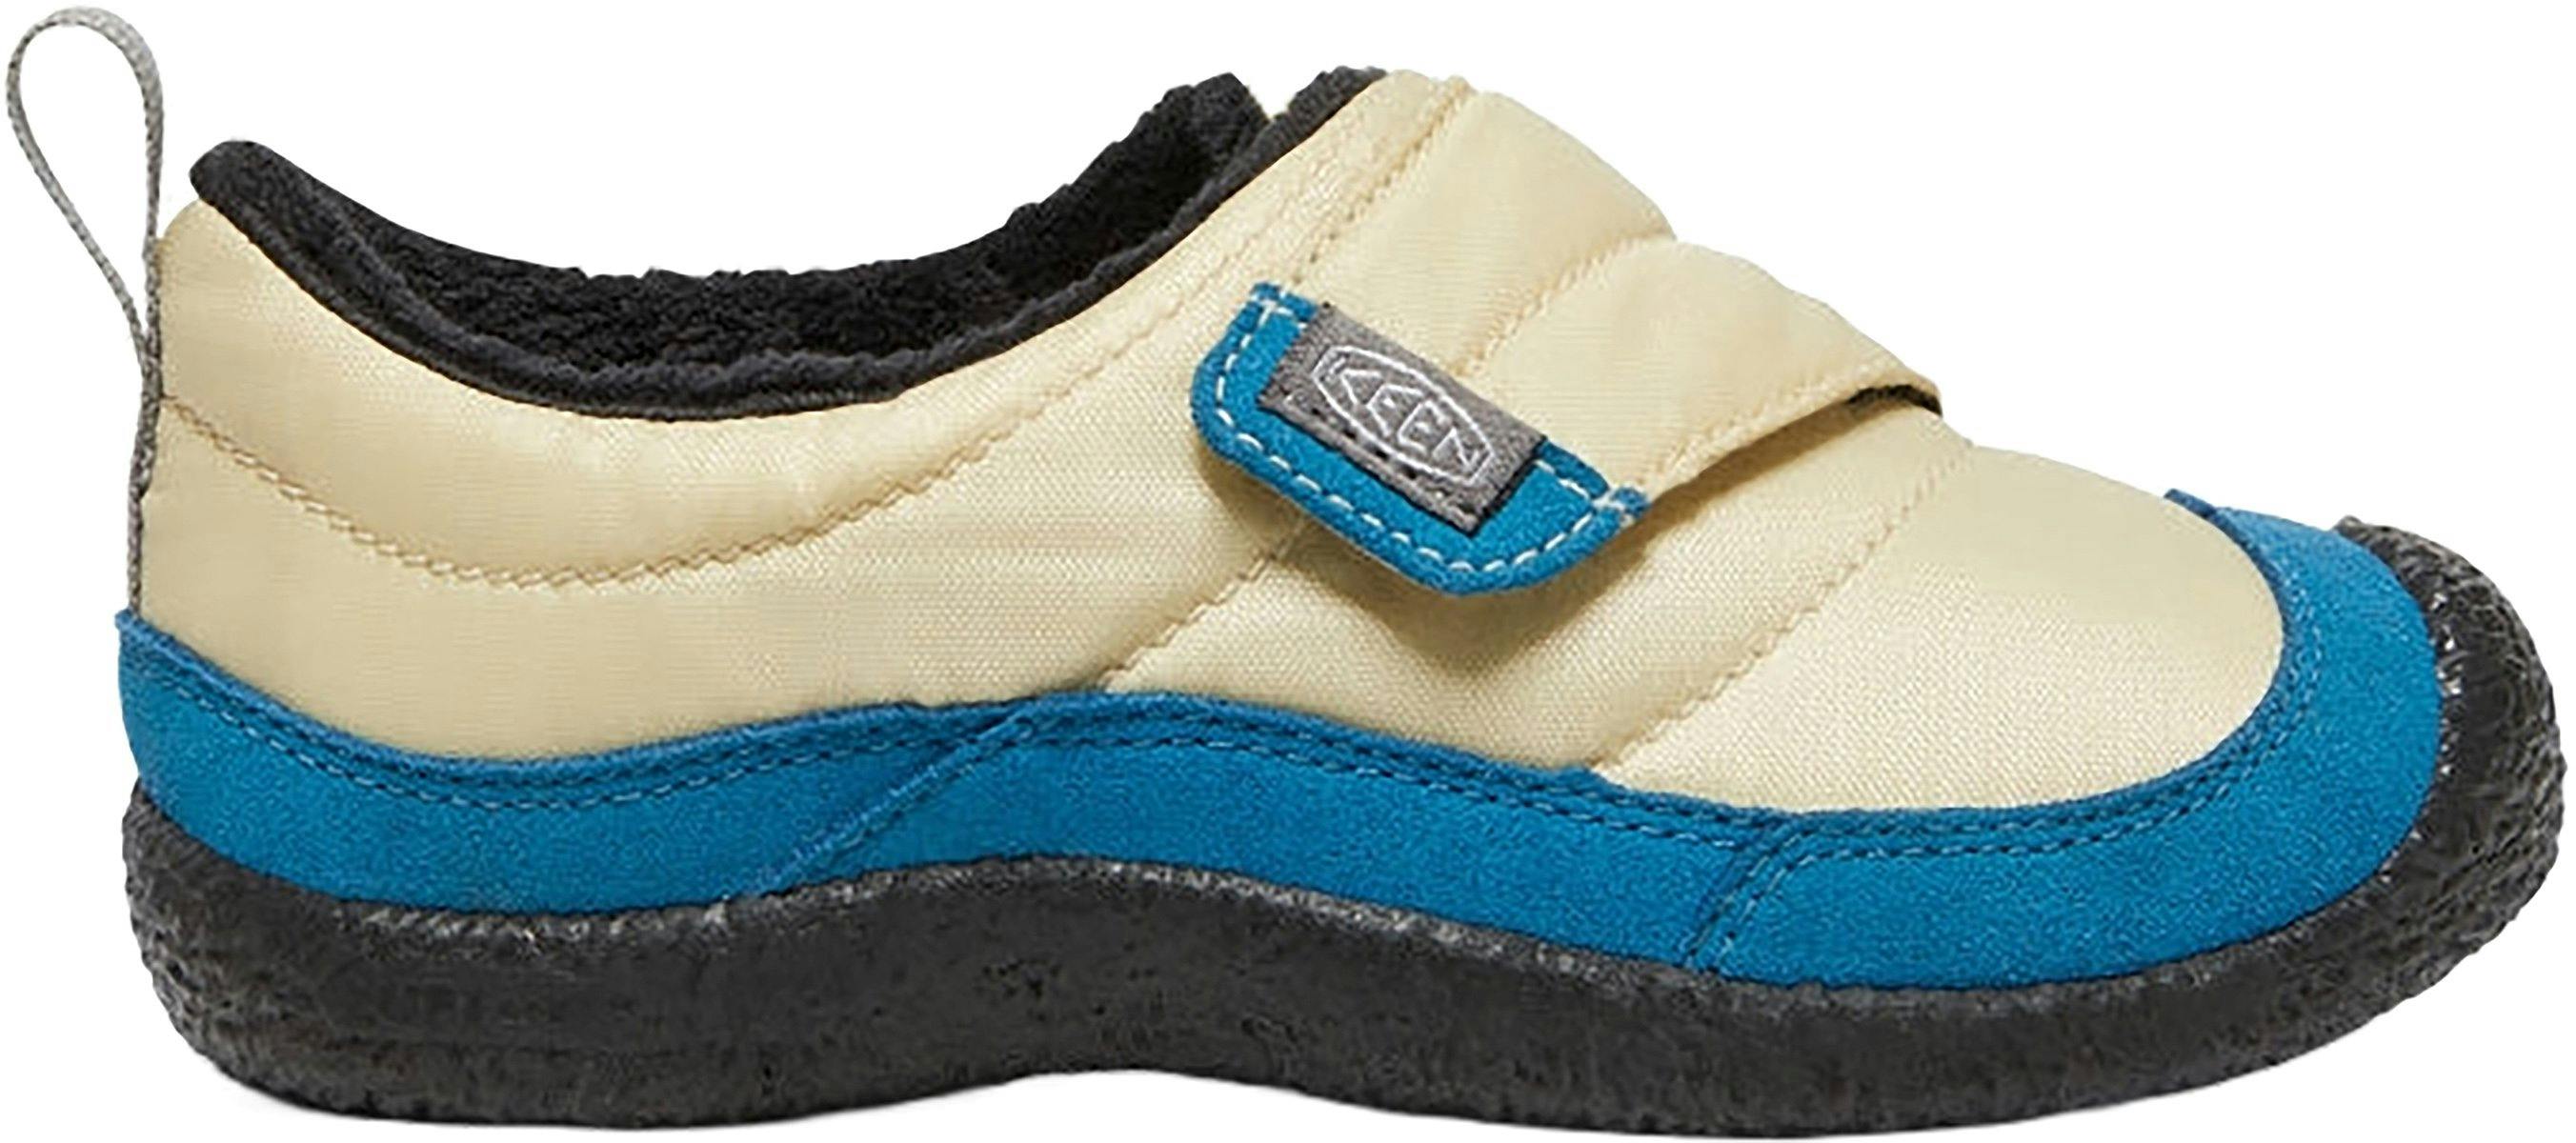 Product image for Howser Low Wrap Slip-on Shoe - Youth